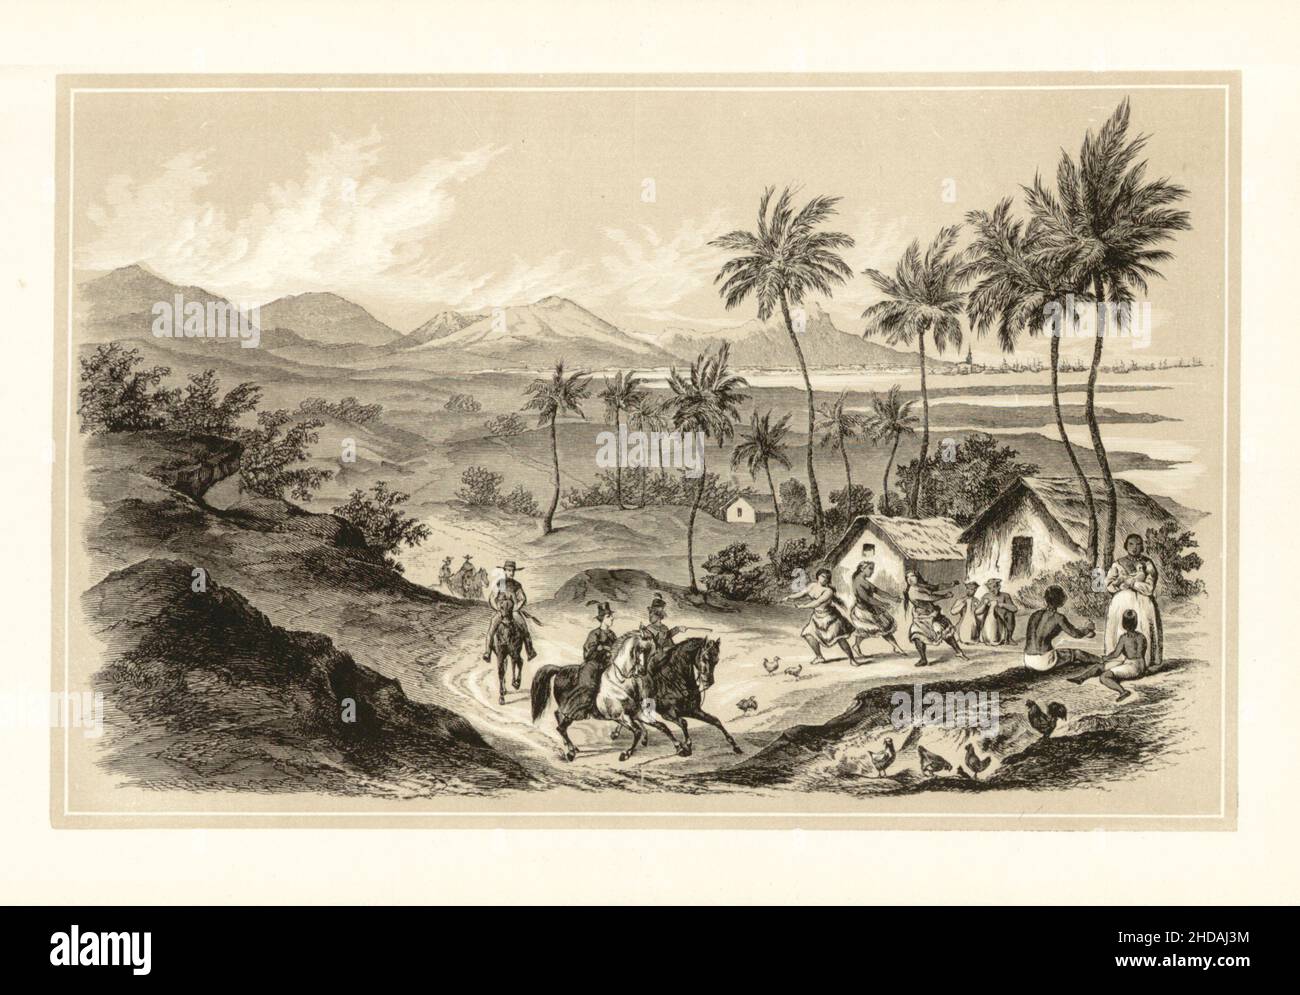 Antique lithograph of 19th century Hawaiian Kingdom: Honolulu in the island of Ouahou. 1856 Commodore Perry's Expedition Stock Photo